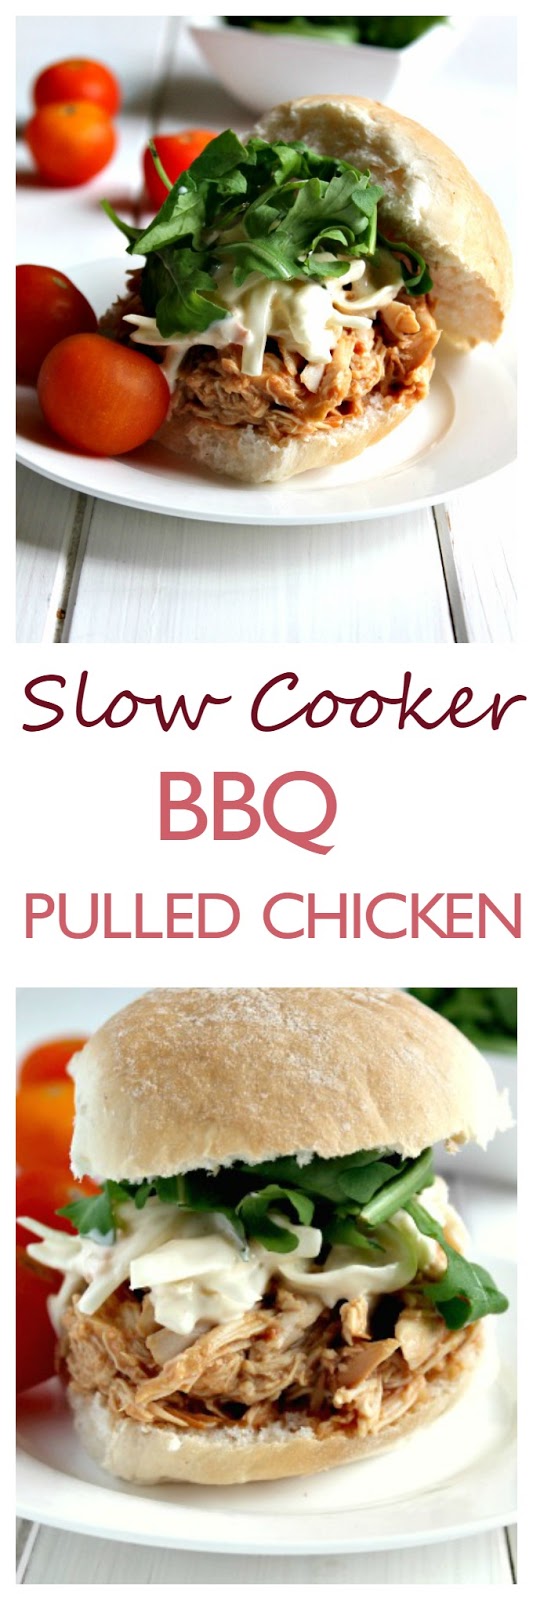 Jam and Clotted Cream: Slow Cooker BBQ Pulled Chicken